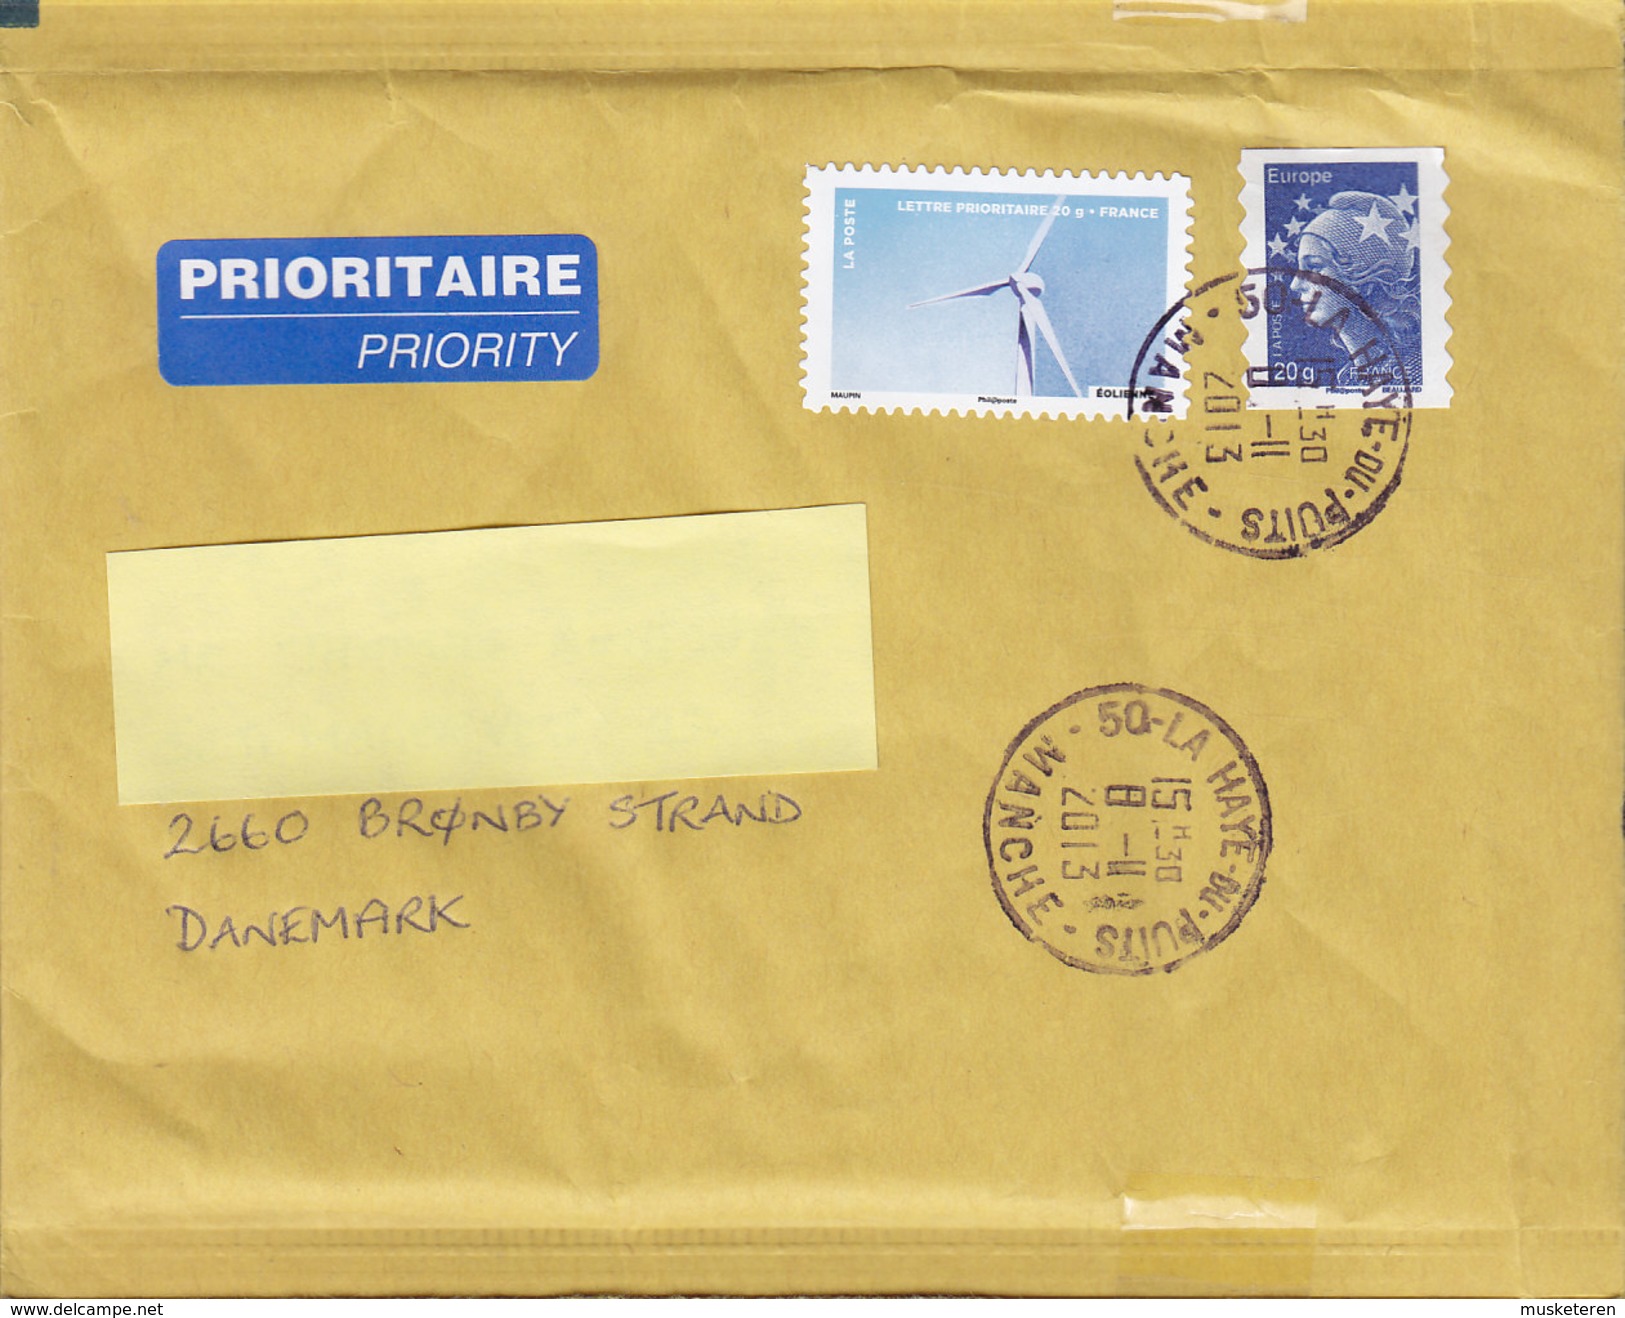 France PRIORITAIRE Priority Label LA HAYE Du PUITS 2013 Cover Lettre BRØNDBY STRAND Denmark 2-Sided Marianne Beaujard - 2008-2013 Marianne Of Beaujard